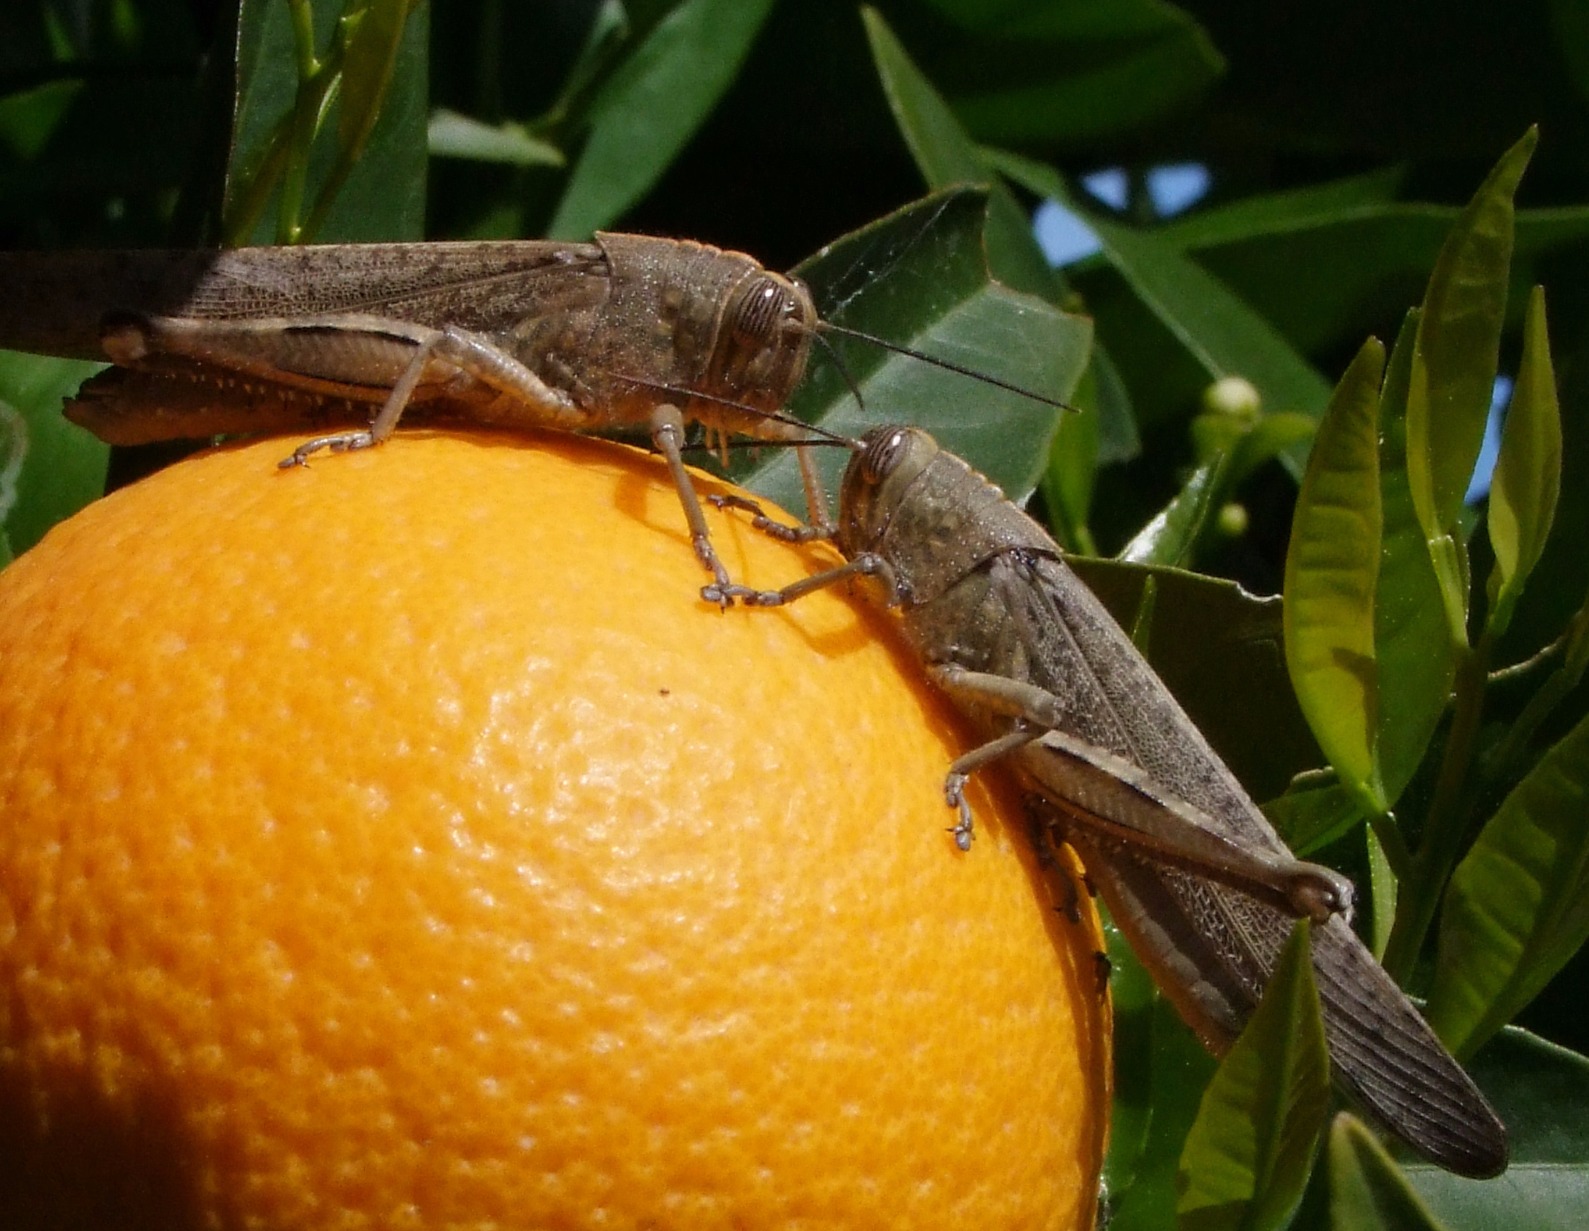 Juicy Greetings - Insects, Arachnids, Reptiles & Amphibians, Orange | Fruit | Grasshopper | Insect | Juicy | Fly